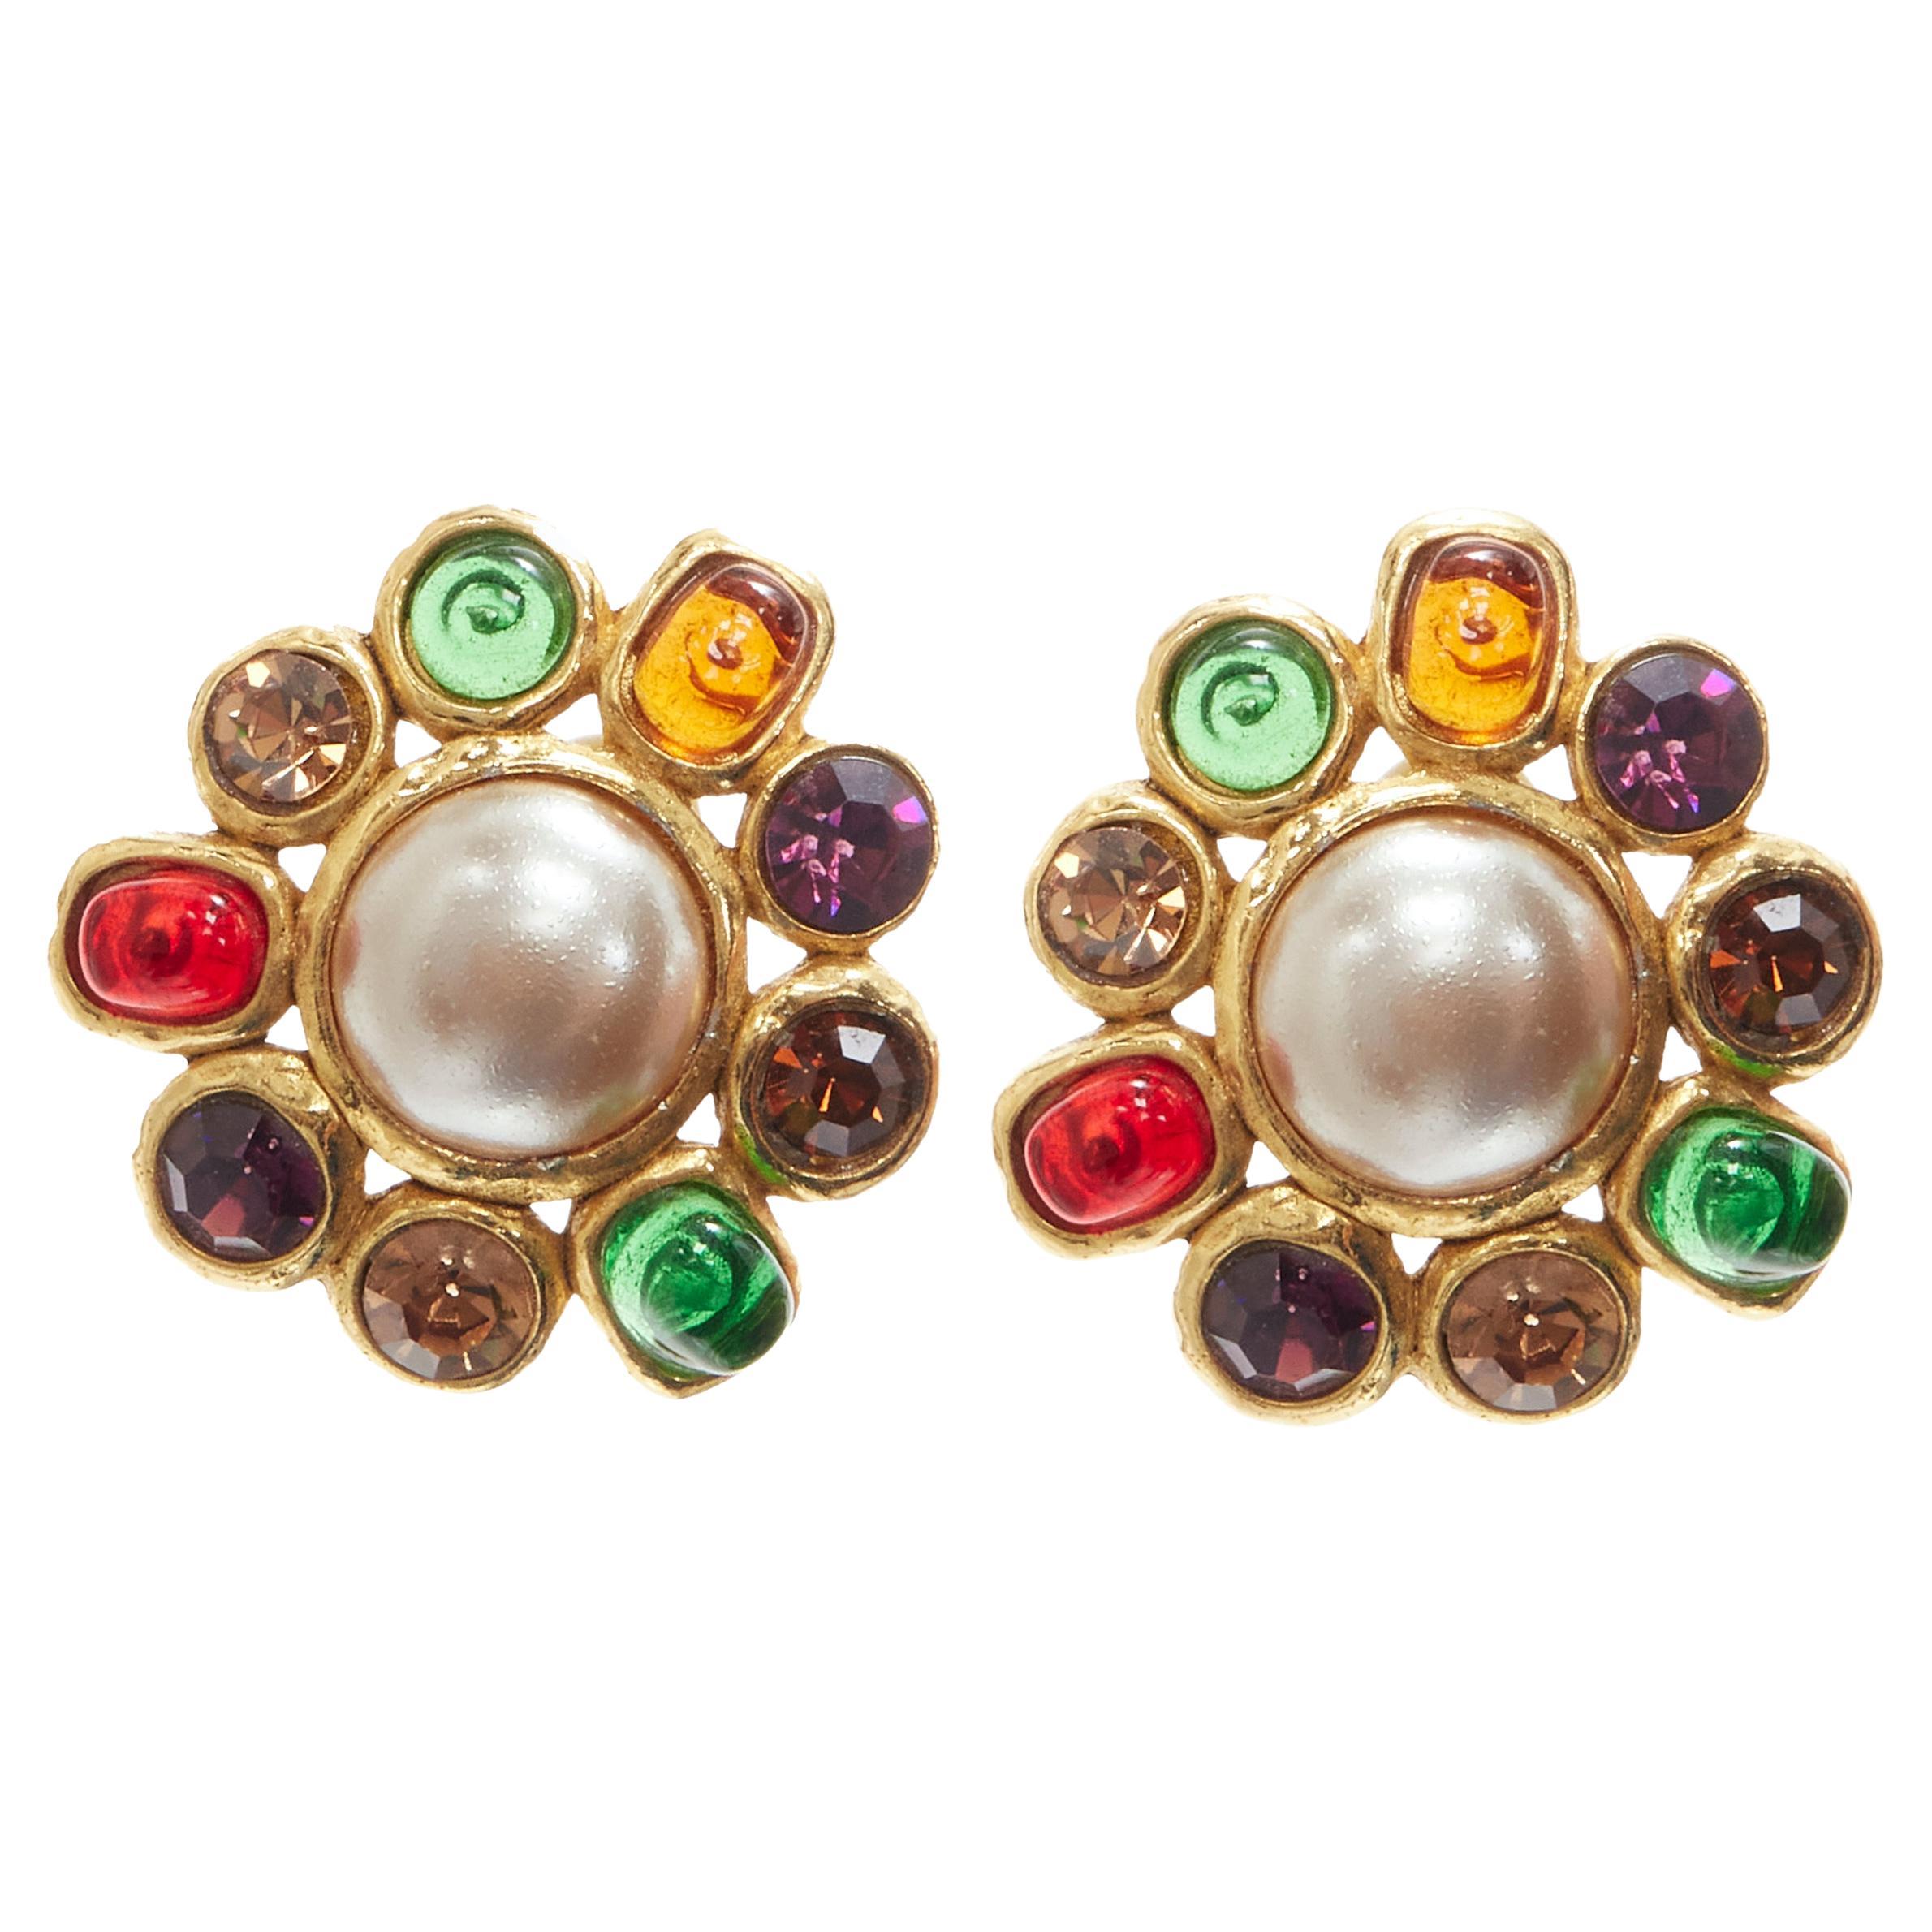 CHANEL, Jewelry, Chanel Cc Gold Large Pearl Clip On Earrings